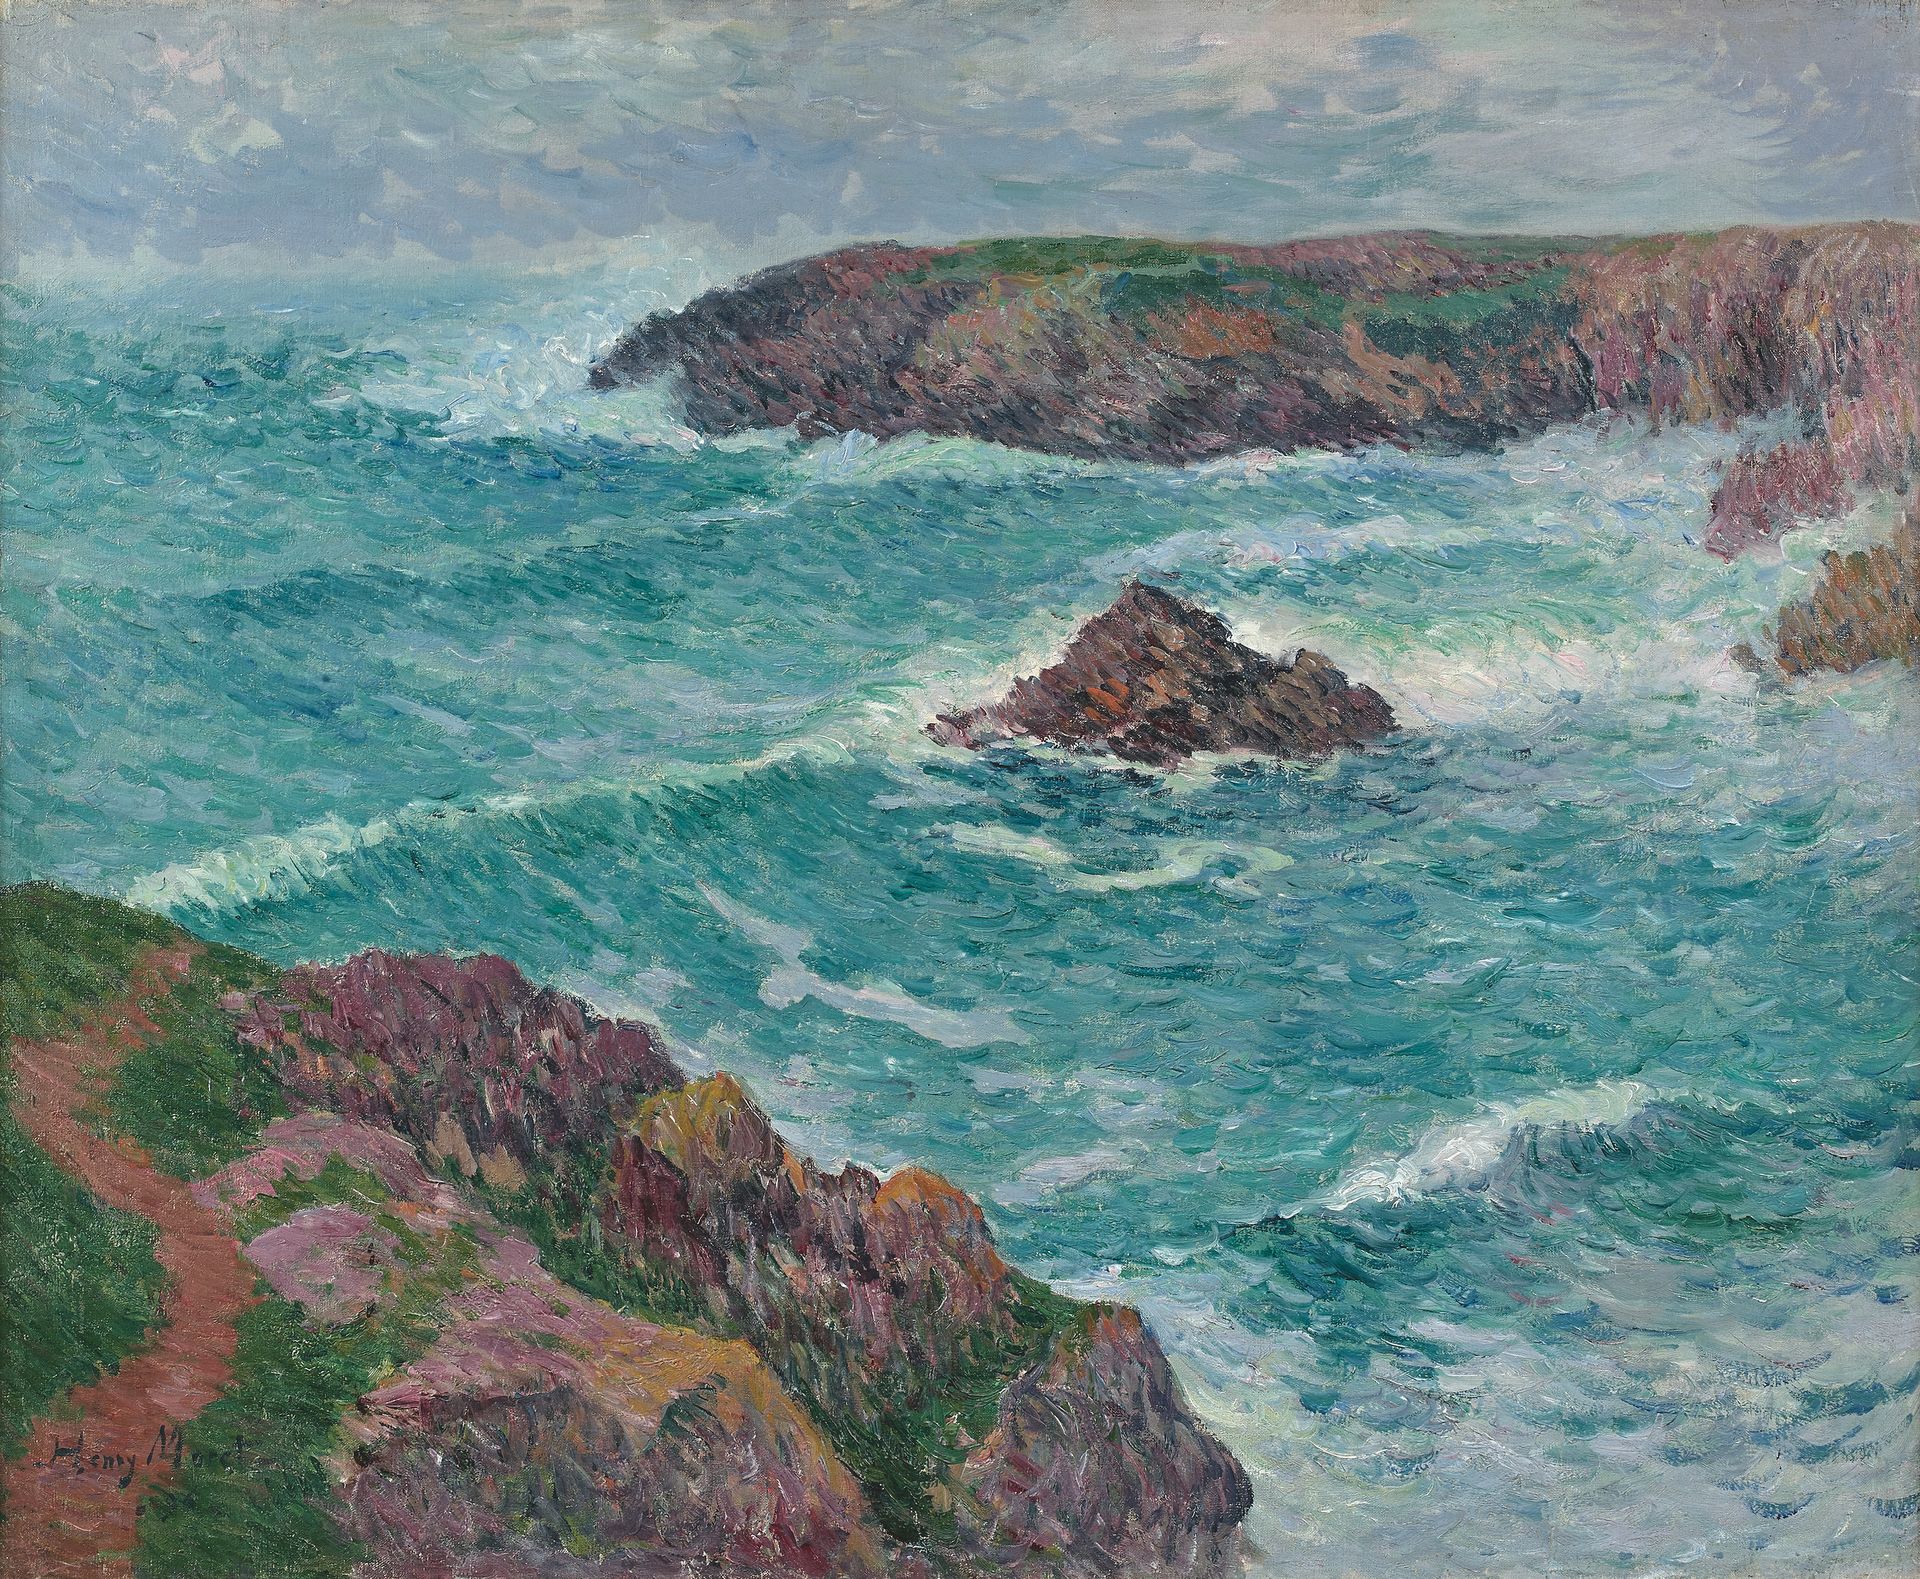 Henry MORET (1856-1913) Groix, the swell and the pink path, 1896
Oil on canvas, &hellip;